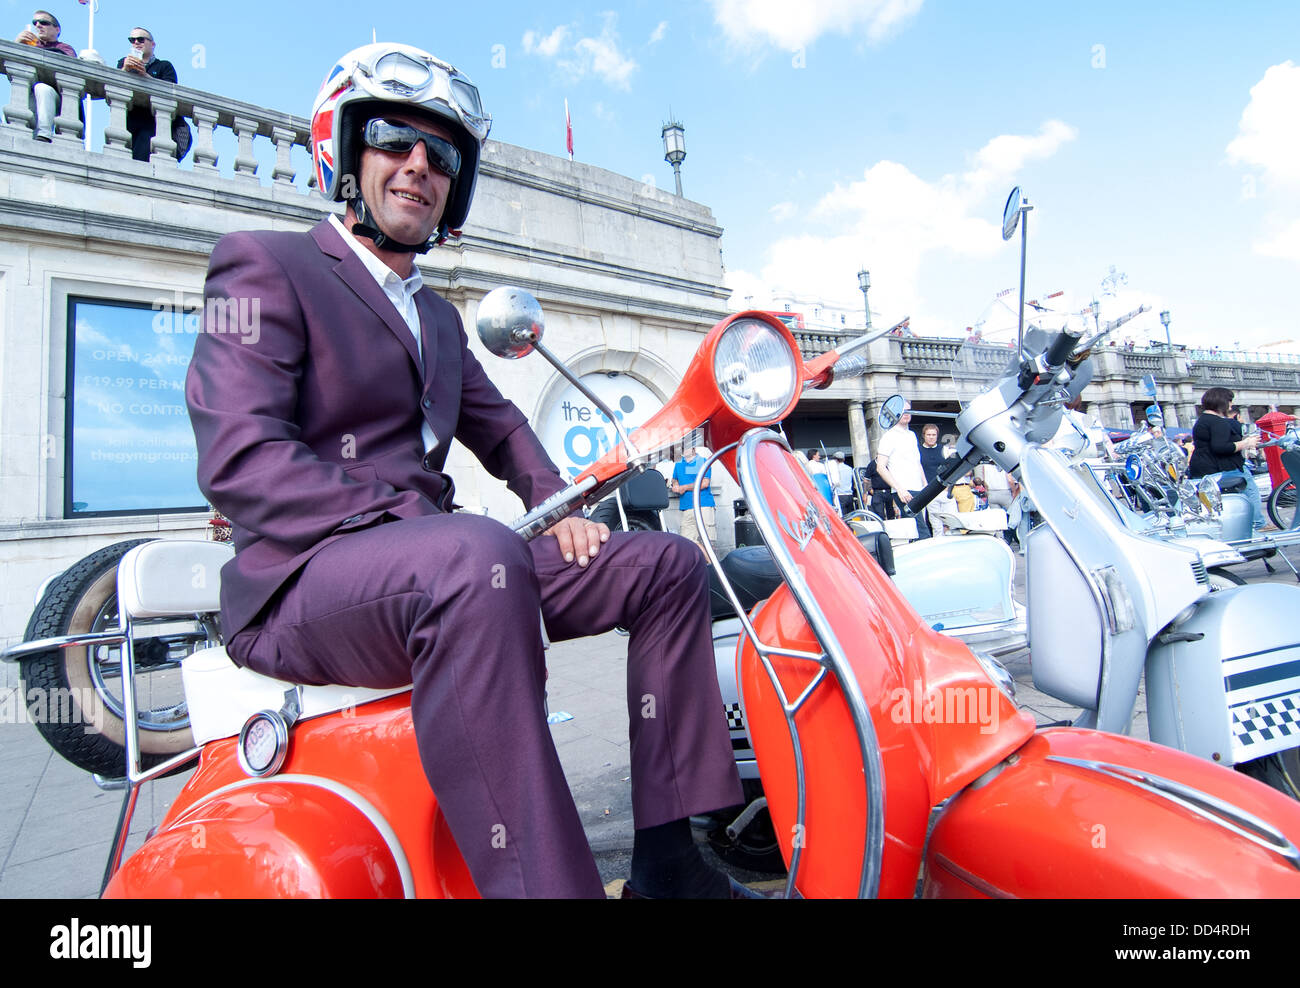 A two tone suit wearing Mod enjoying the Mod Scene and August Bank Holiday. Stock Photo